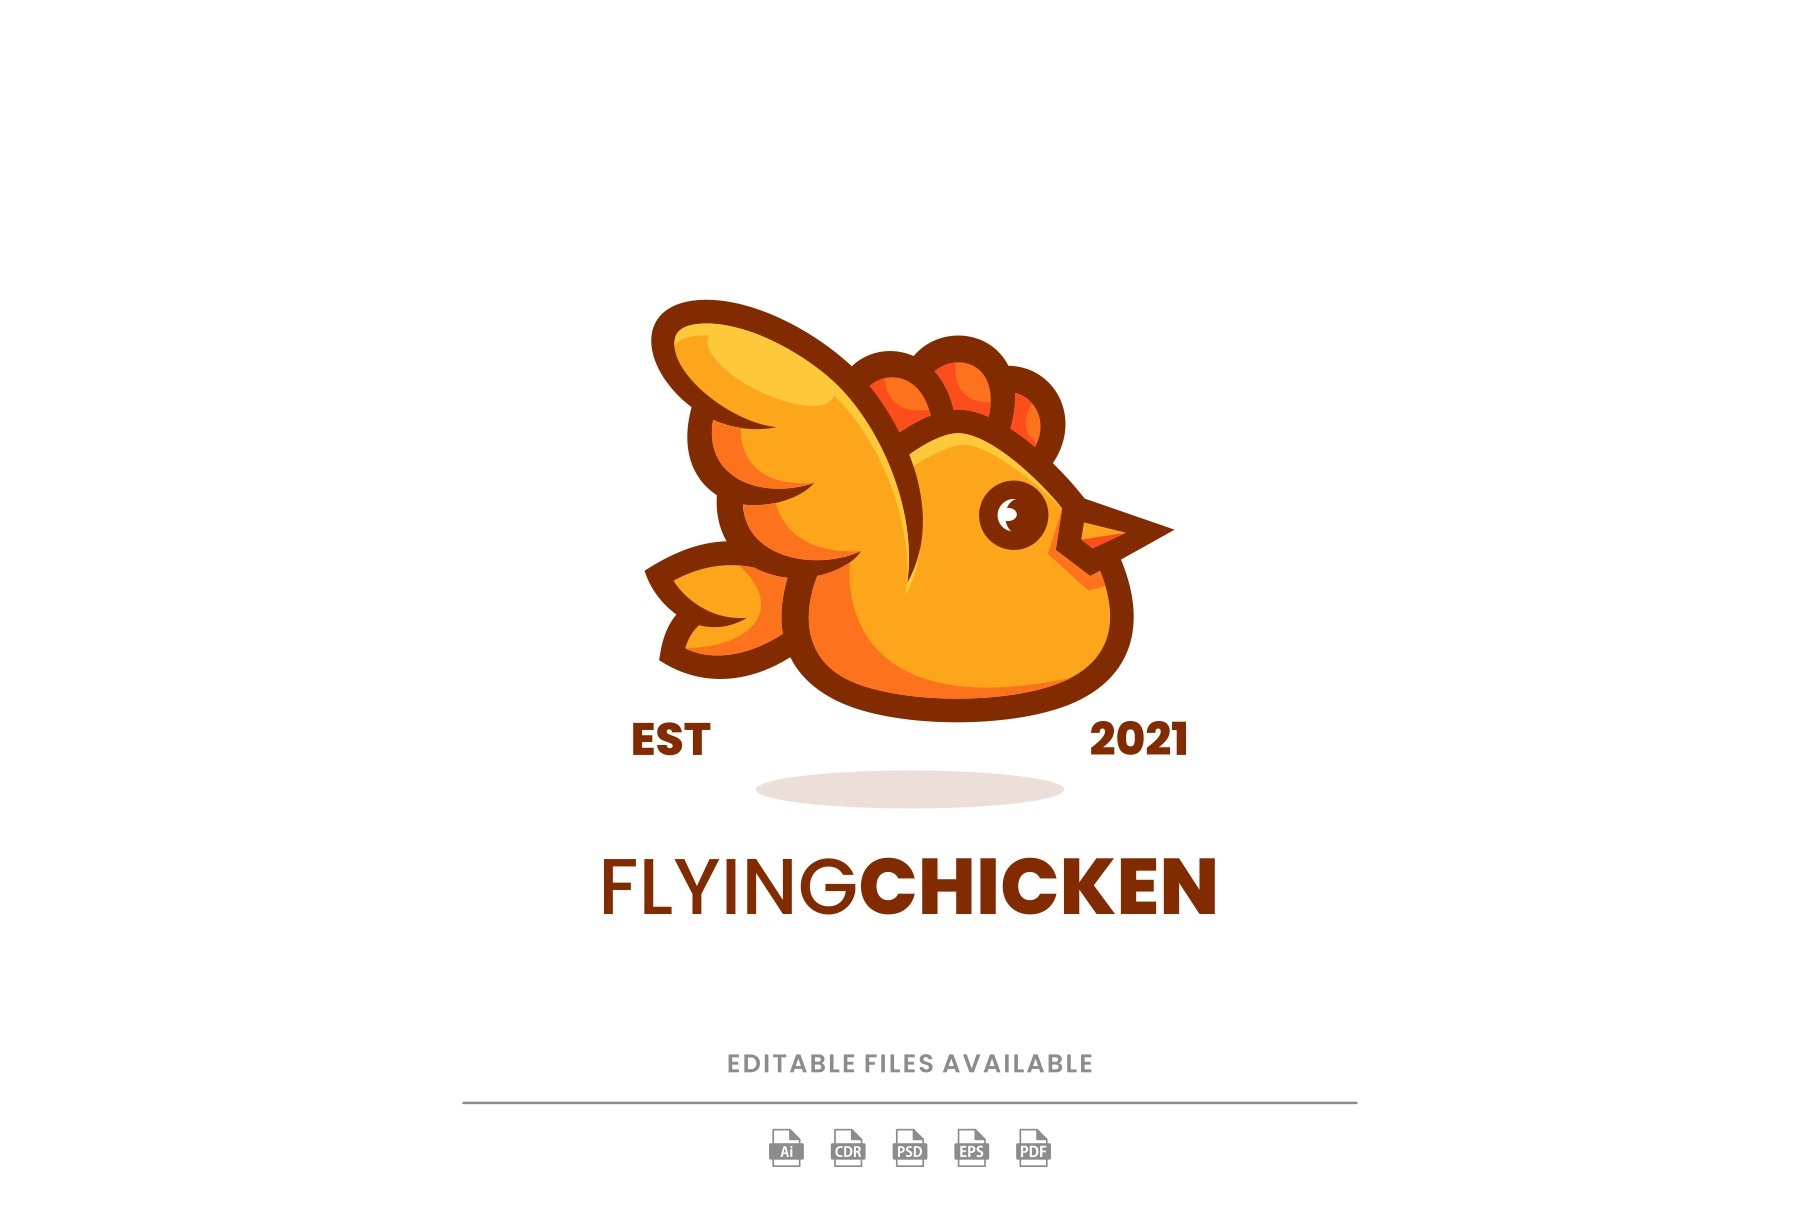 Flying Chicken Simple Mascot Logo cover image.